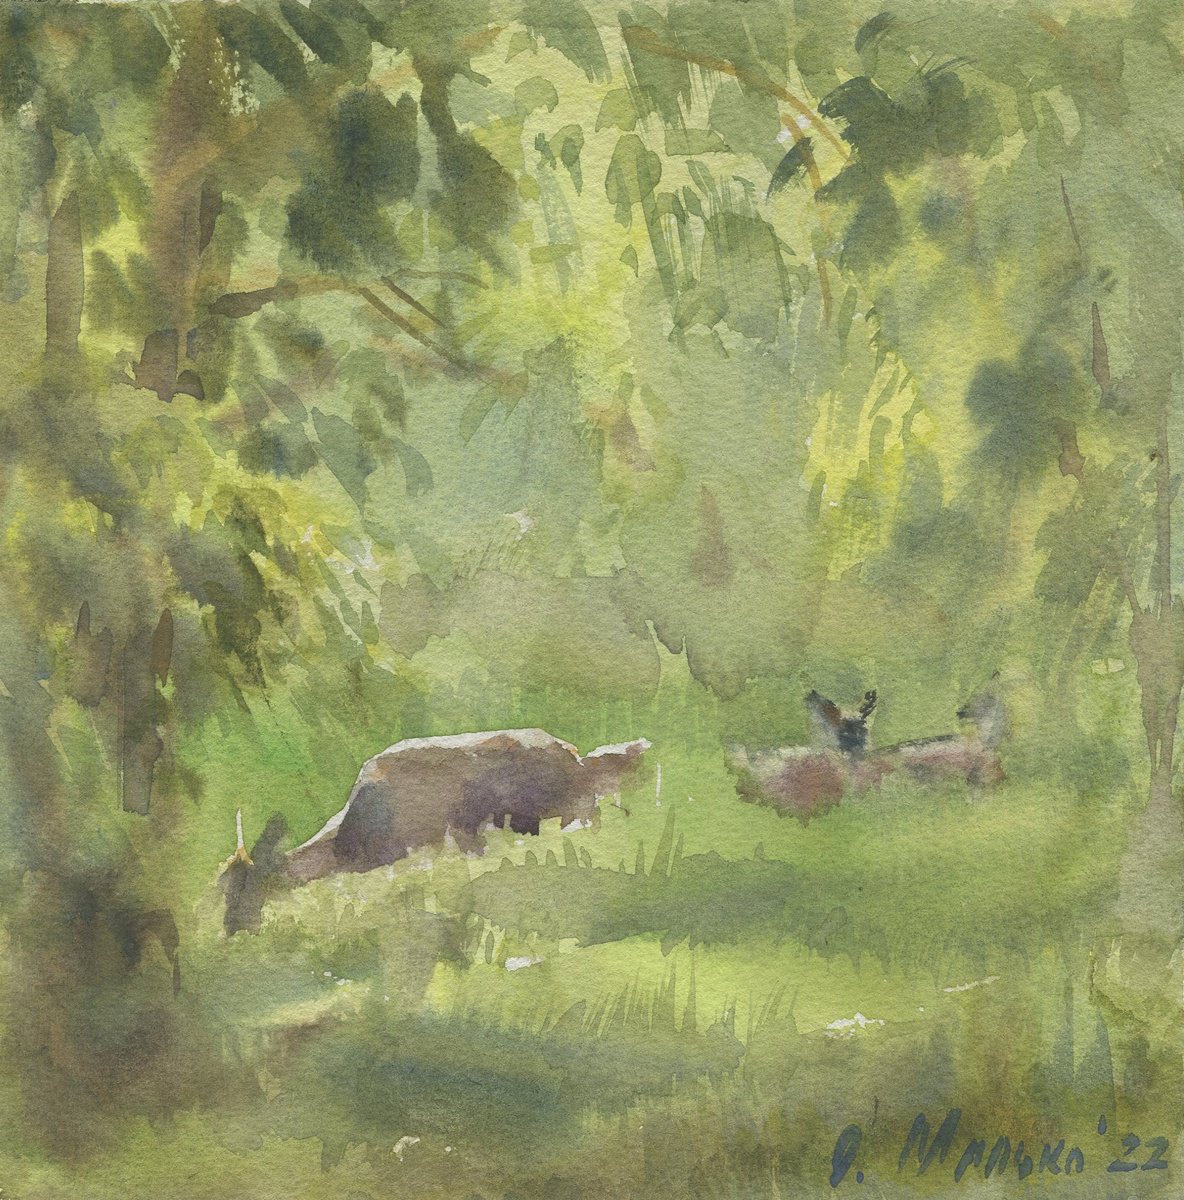 Goats among the greens. Summer sketch / ORIGINAL picture Small size watercolor Square form... by Olha Malko